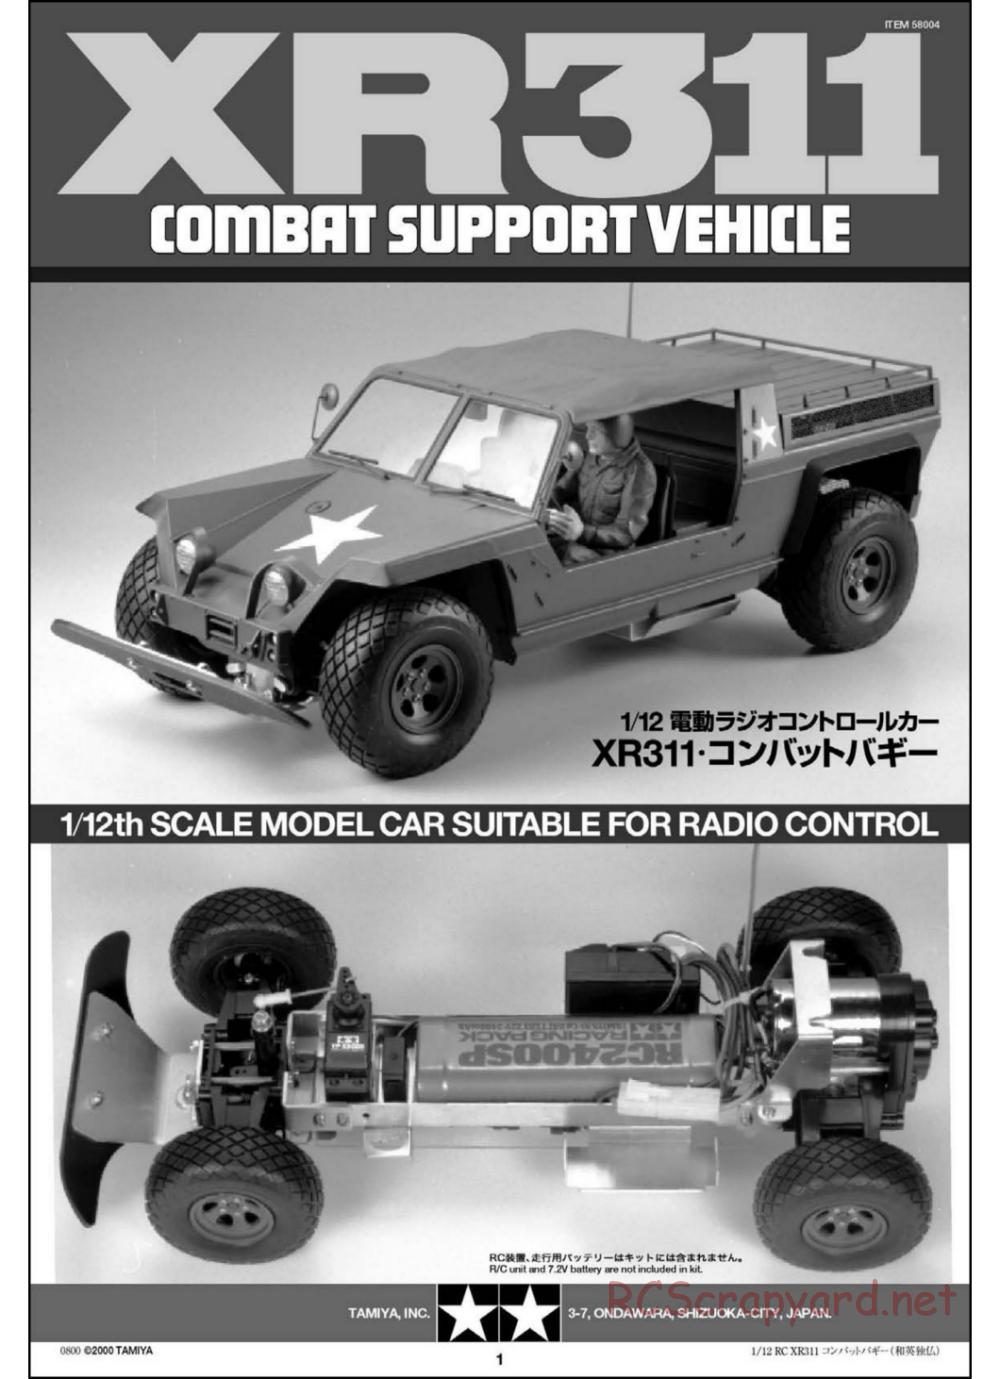 Tamiya - XR311 Combat Support Vehicle (2012) Chassis - Manual - Page 1